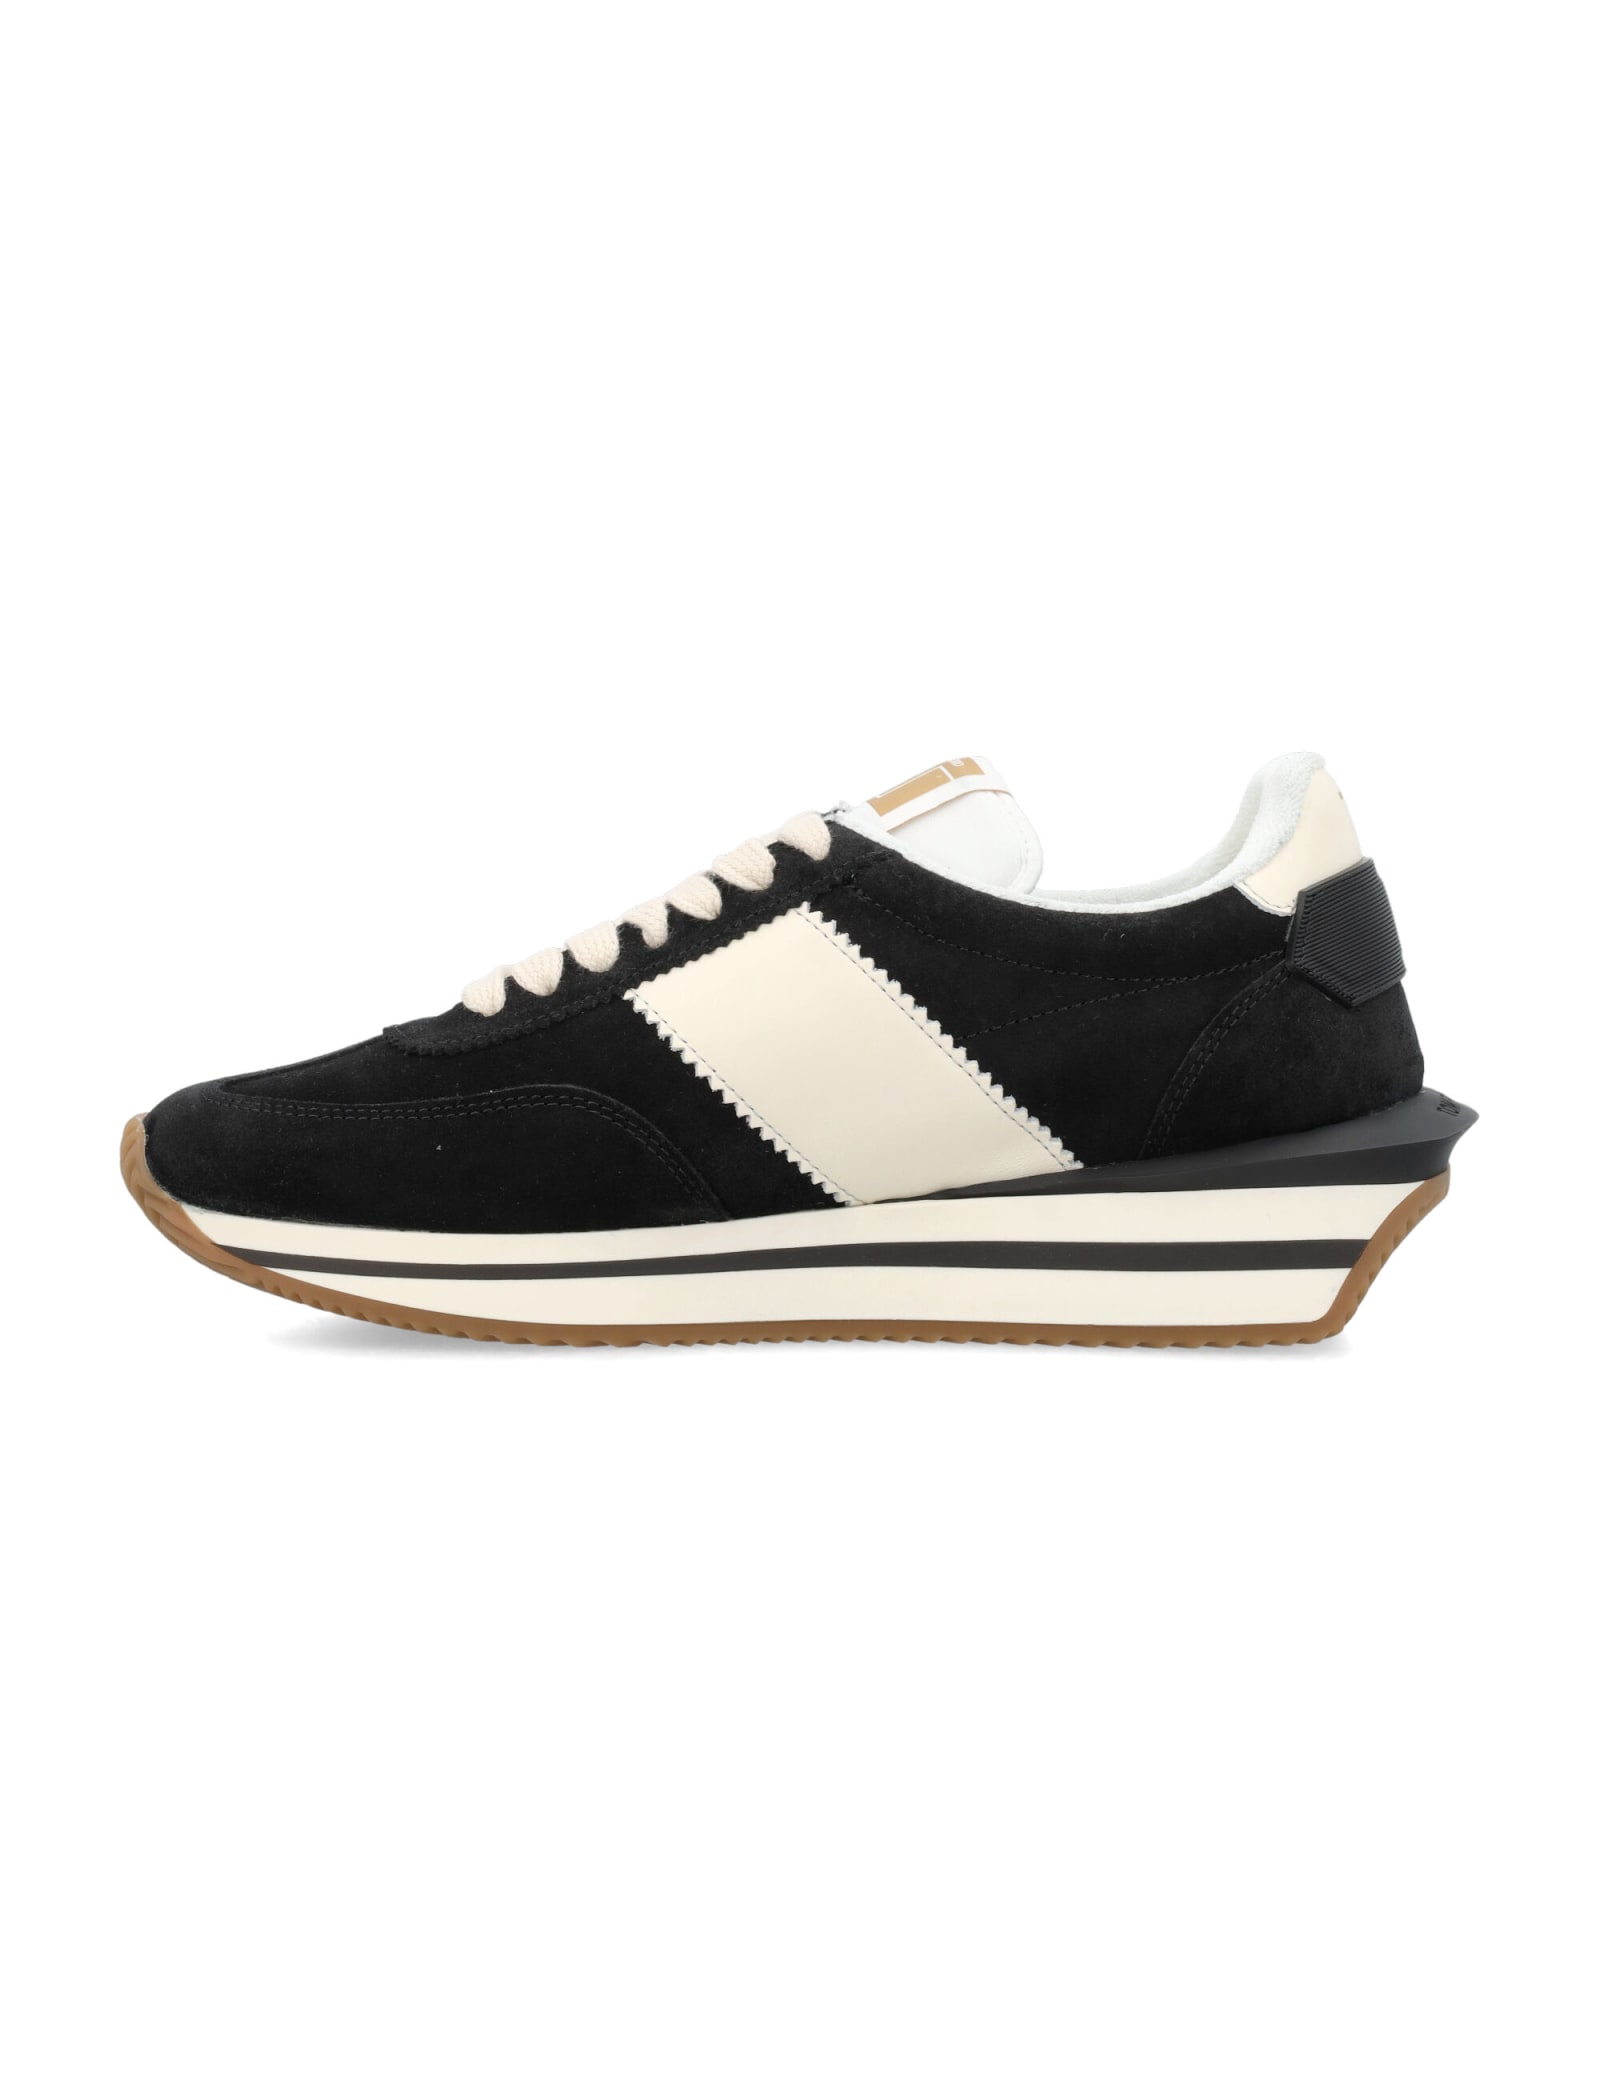 Shop Tom Ford James Sneakers In Black + Cream